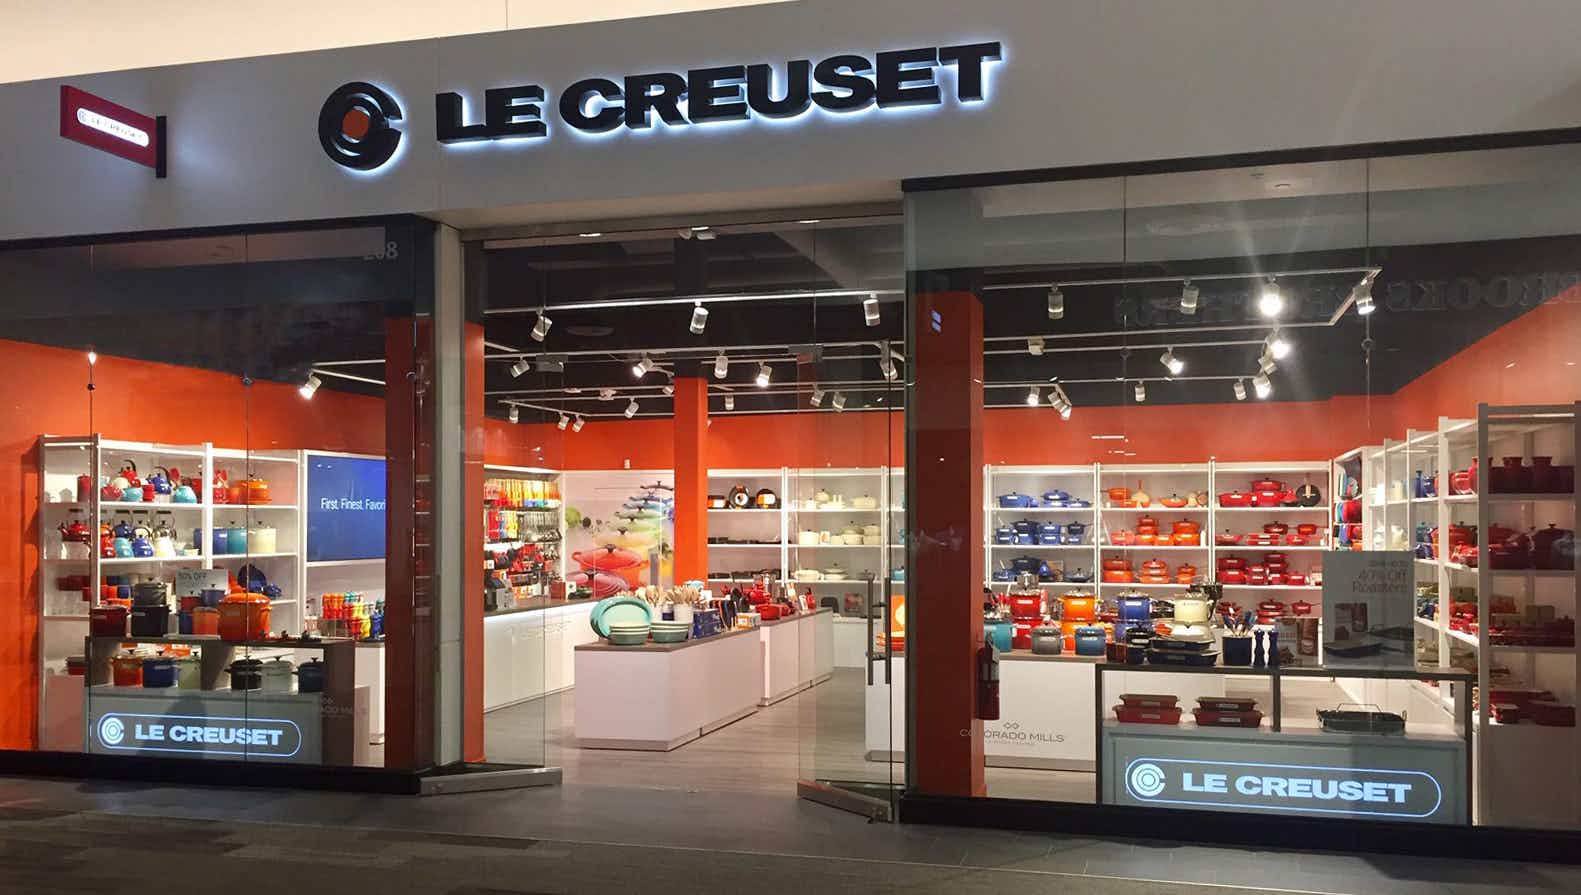 Le Creuset storefront entrance in mall